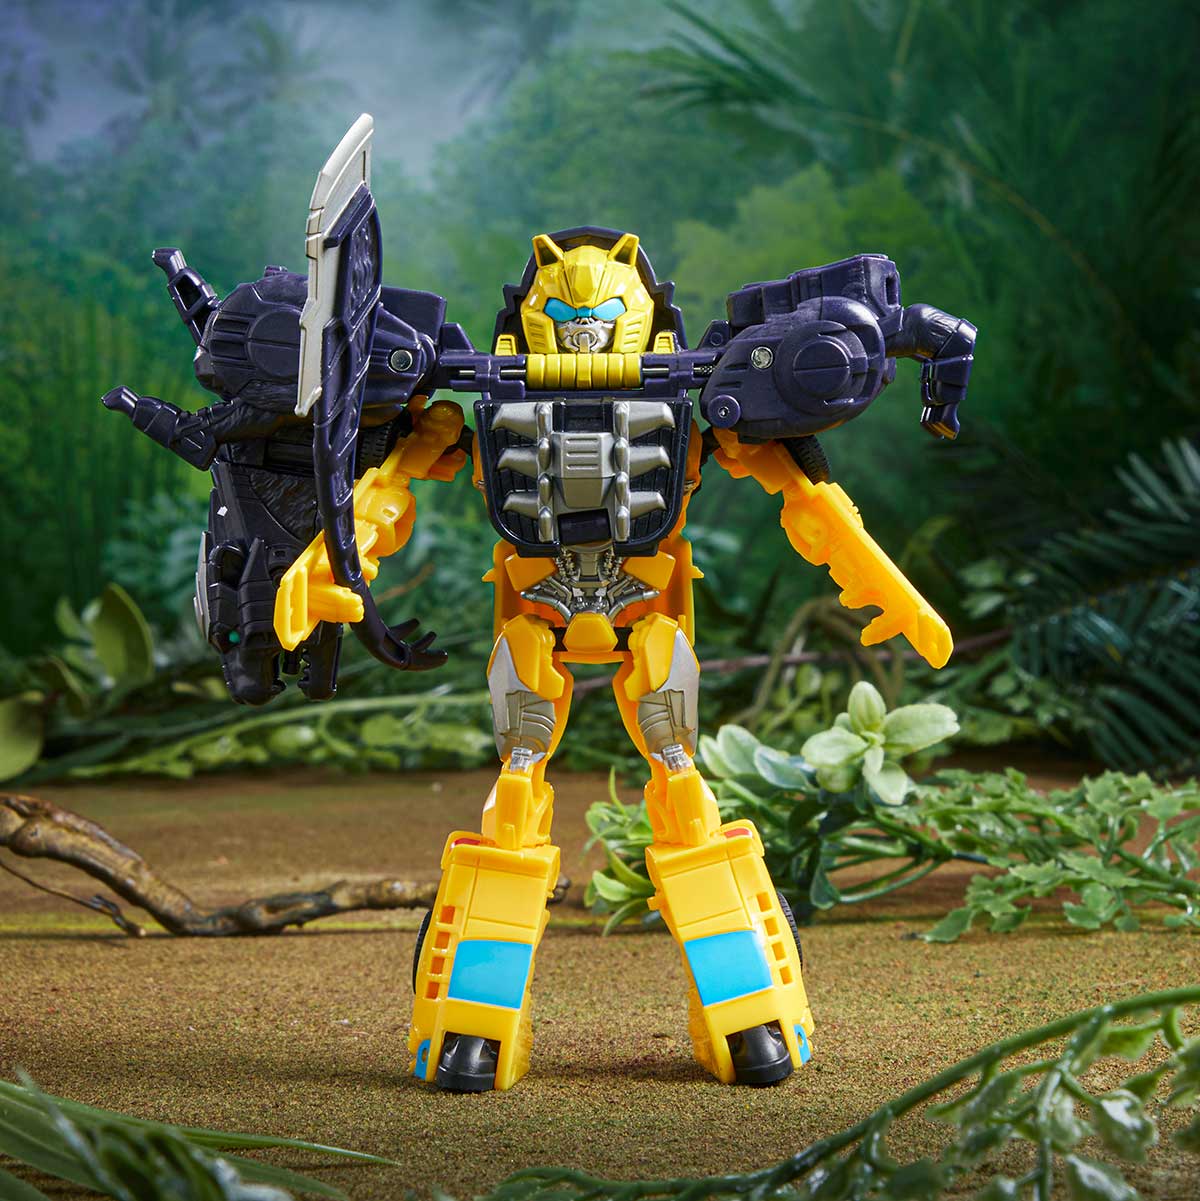 Transformers Prime Beast Hunters 6 Inch Action Figure Deluxe Class